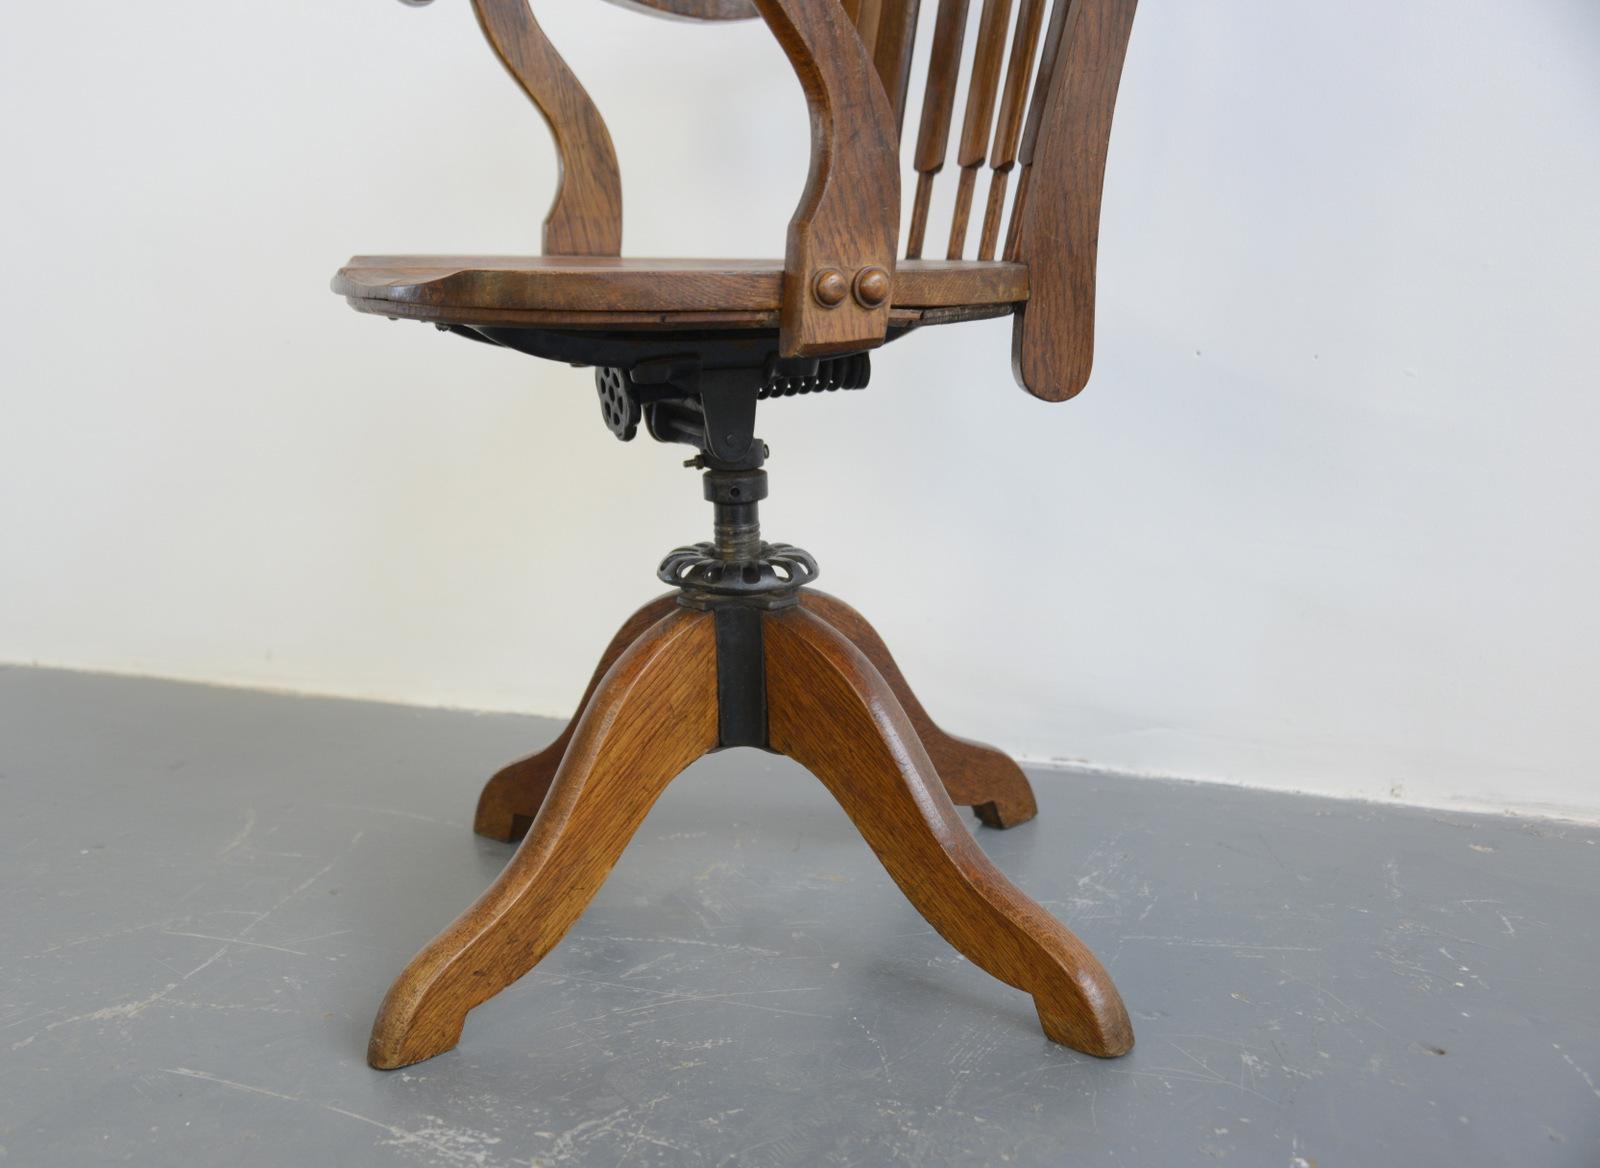 Oak desk chair, circa 1910

- Height adjustable
- Swivels
- Sprung seat
- Belgian, 1910
- 57cm wide x 48cm deep x 98cm tall
- 51cm from floor to seat

Condition report:

Fully functioning, waxed and polished.